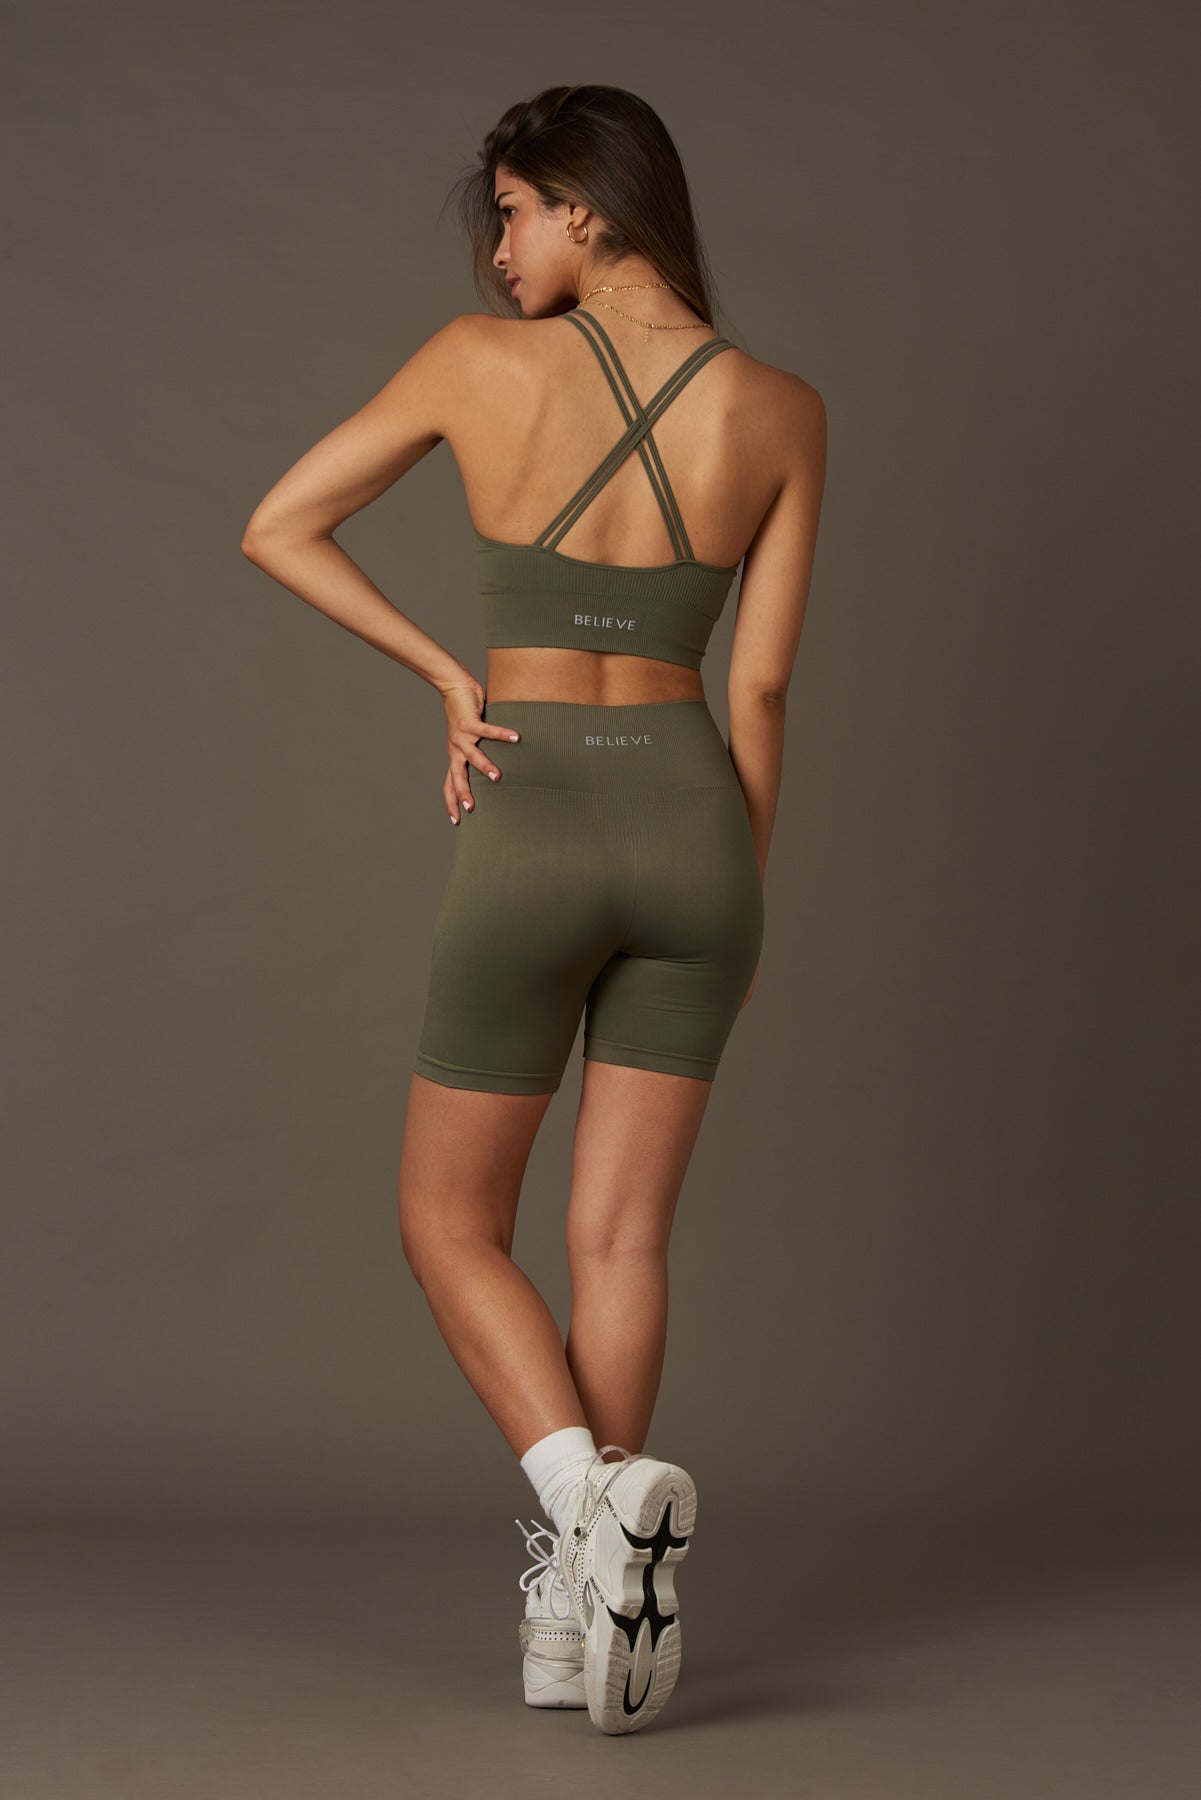 Solar Bra at Caqui-Bras-Shop Clothing Sustainable Recycled Yoga Leggings Women On-line Barcelona Believe Athletics Sustainable Recycled Yoga Clothes